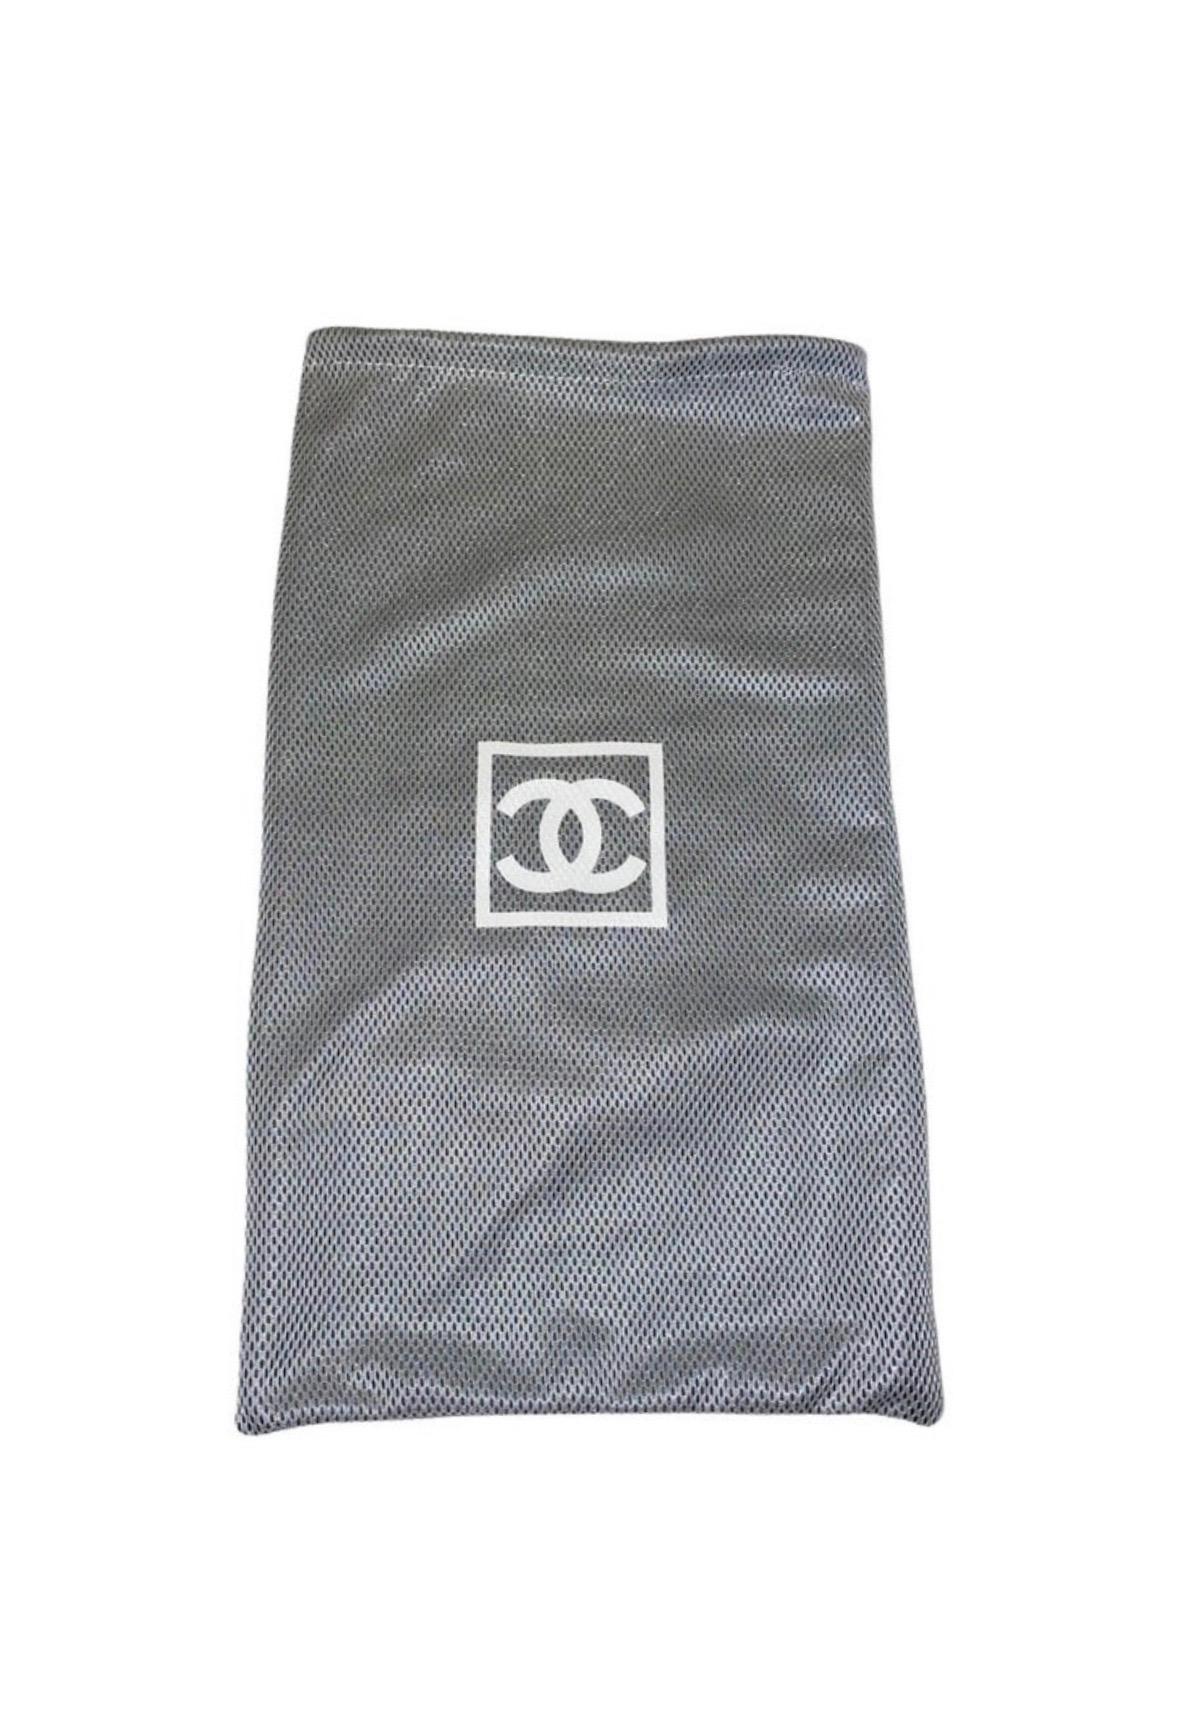 NEW Chanel CC Logo Signature Double Face Terry Cloth Beach Pool Sport Towel  1